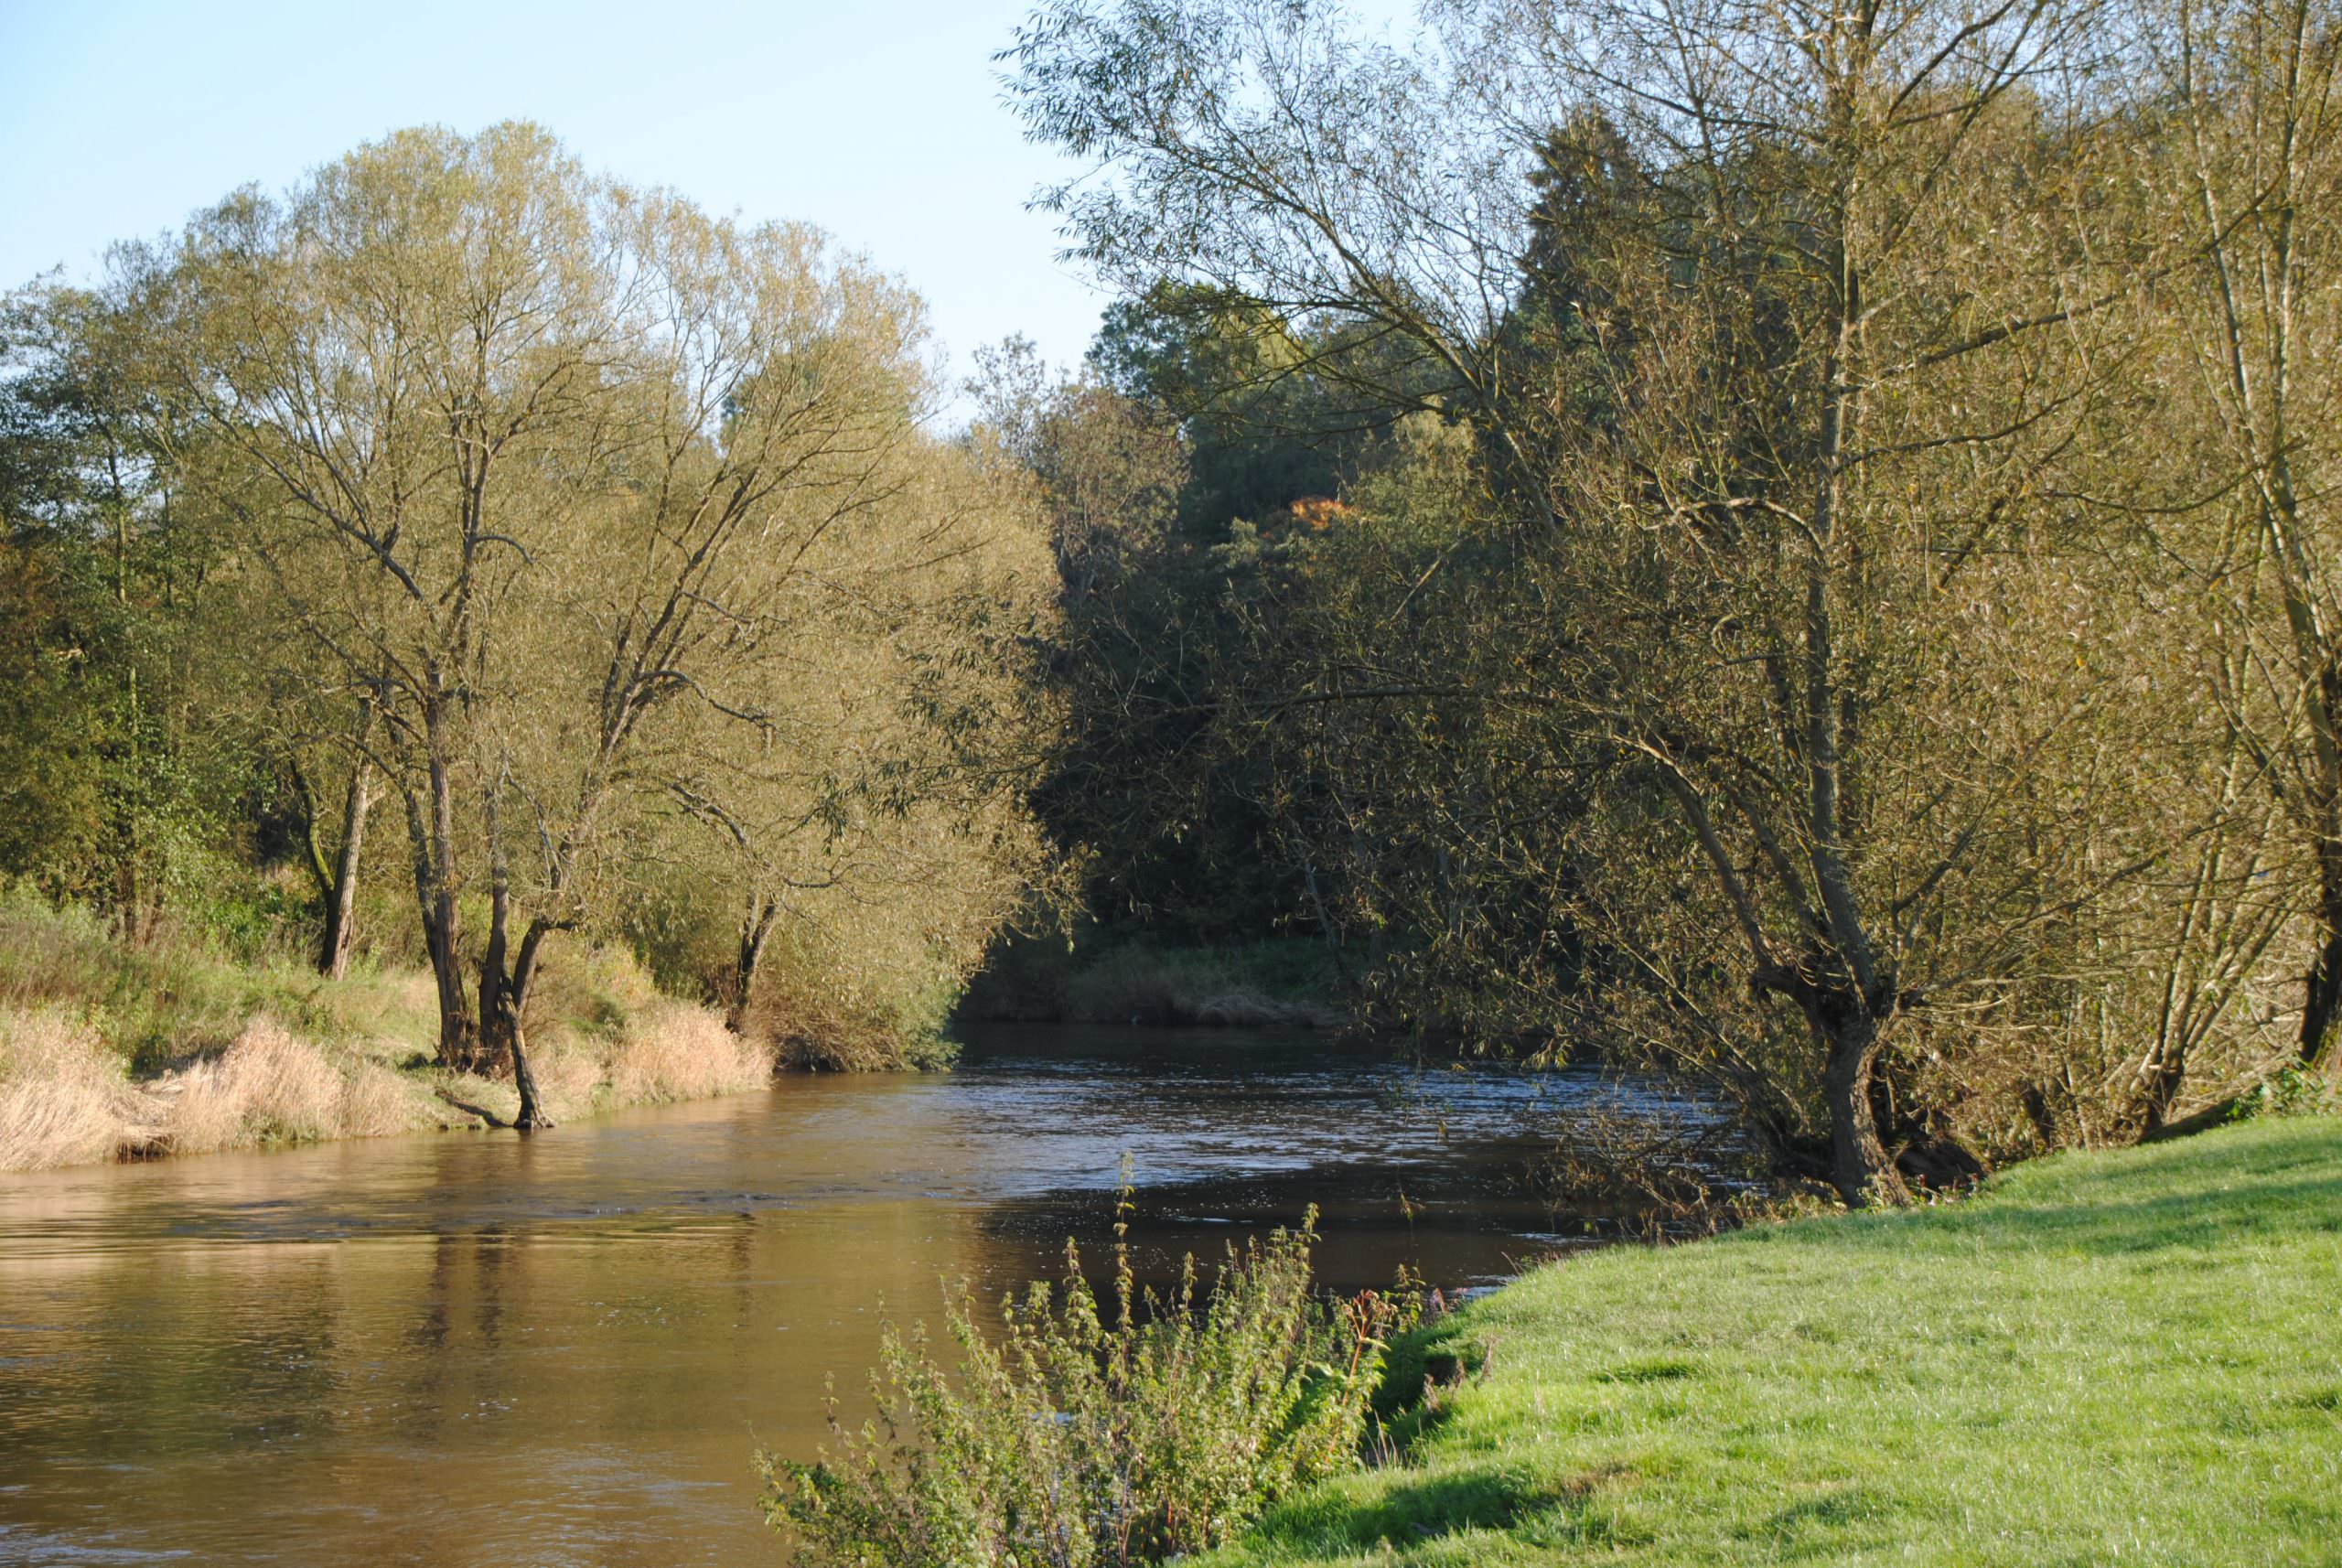 The perfect spot for a picnic, stretch of the River Severn, the river is high and fast running with ripples as the river meanders around the bend. Tall trees tower the far bank, the nearside bank is grassy and close to the edge the reeds are high.